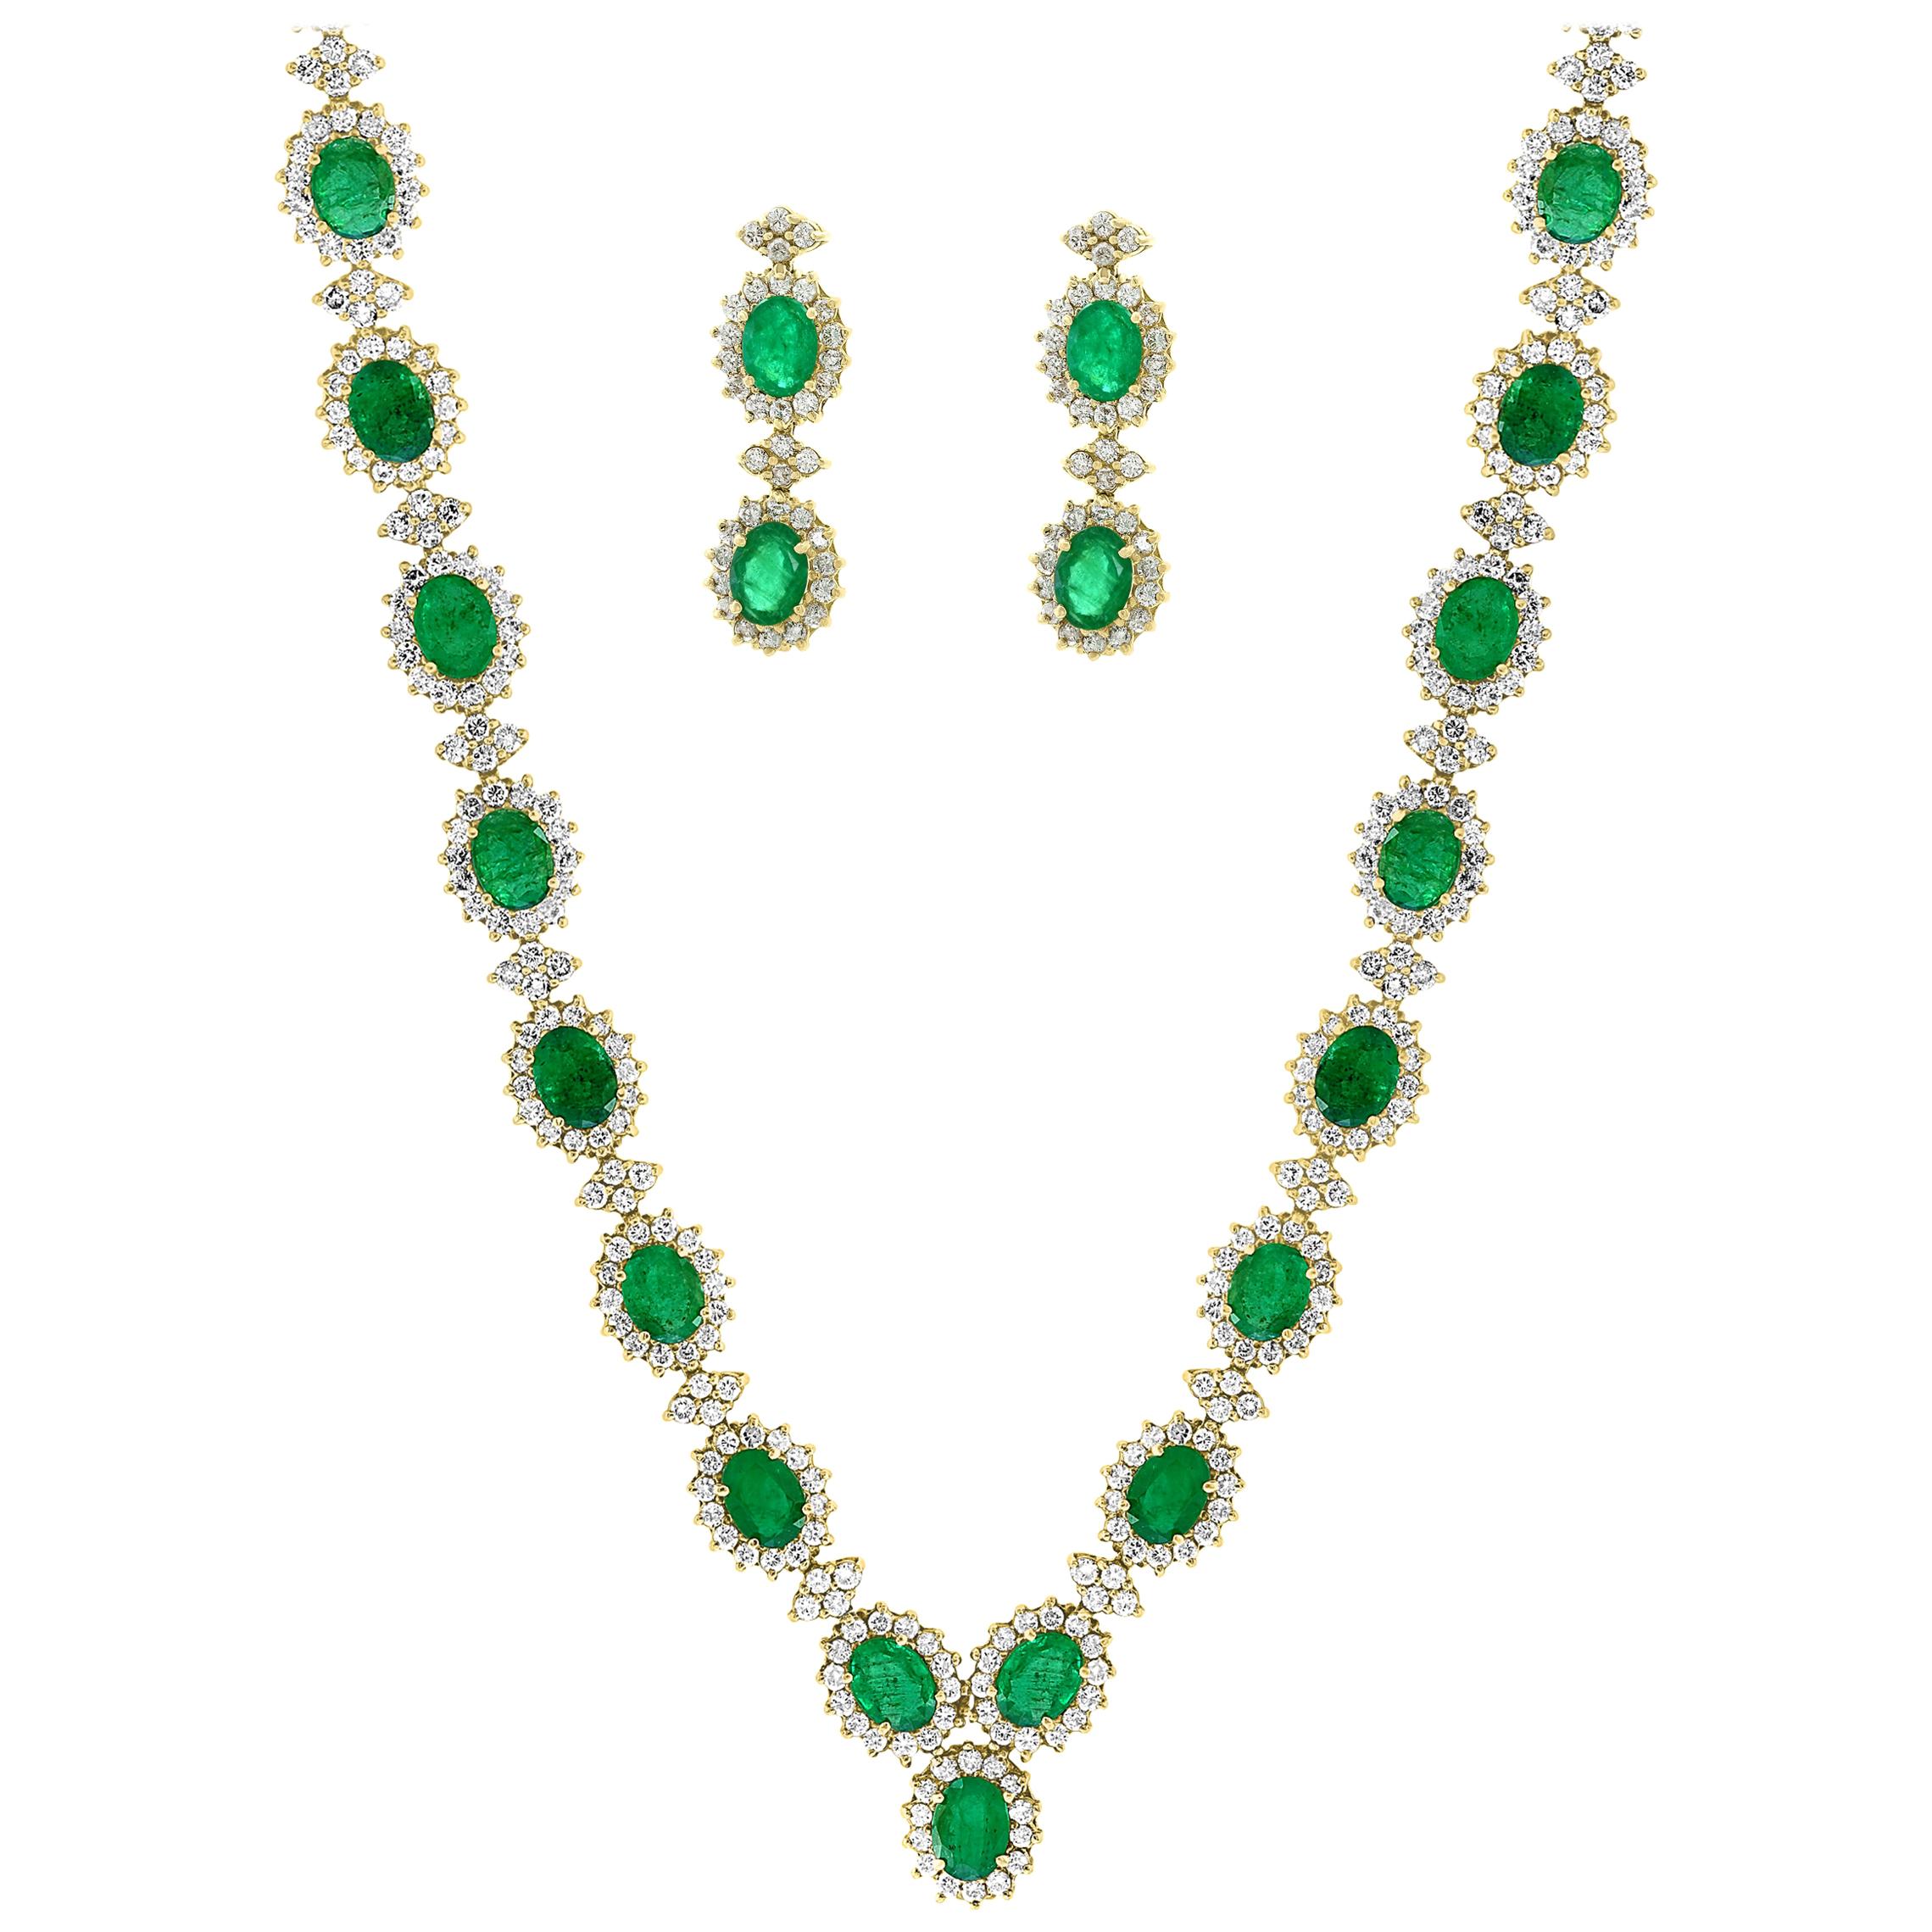 37 Ct Oval Shape Natural  Emerald & 22 Carat Diamond Necklace & Earring  Suite For Sale